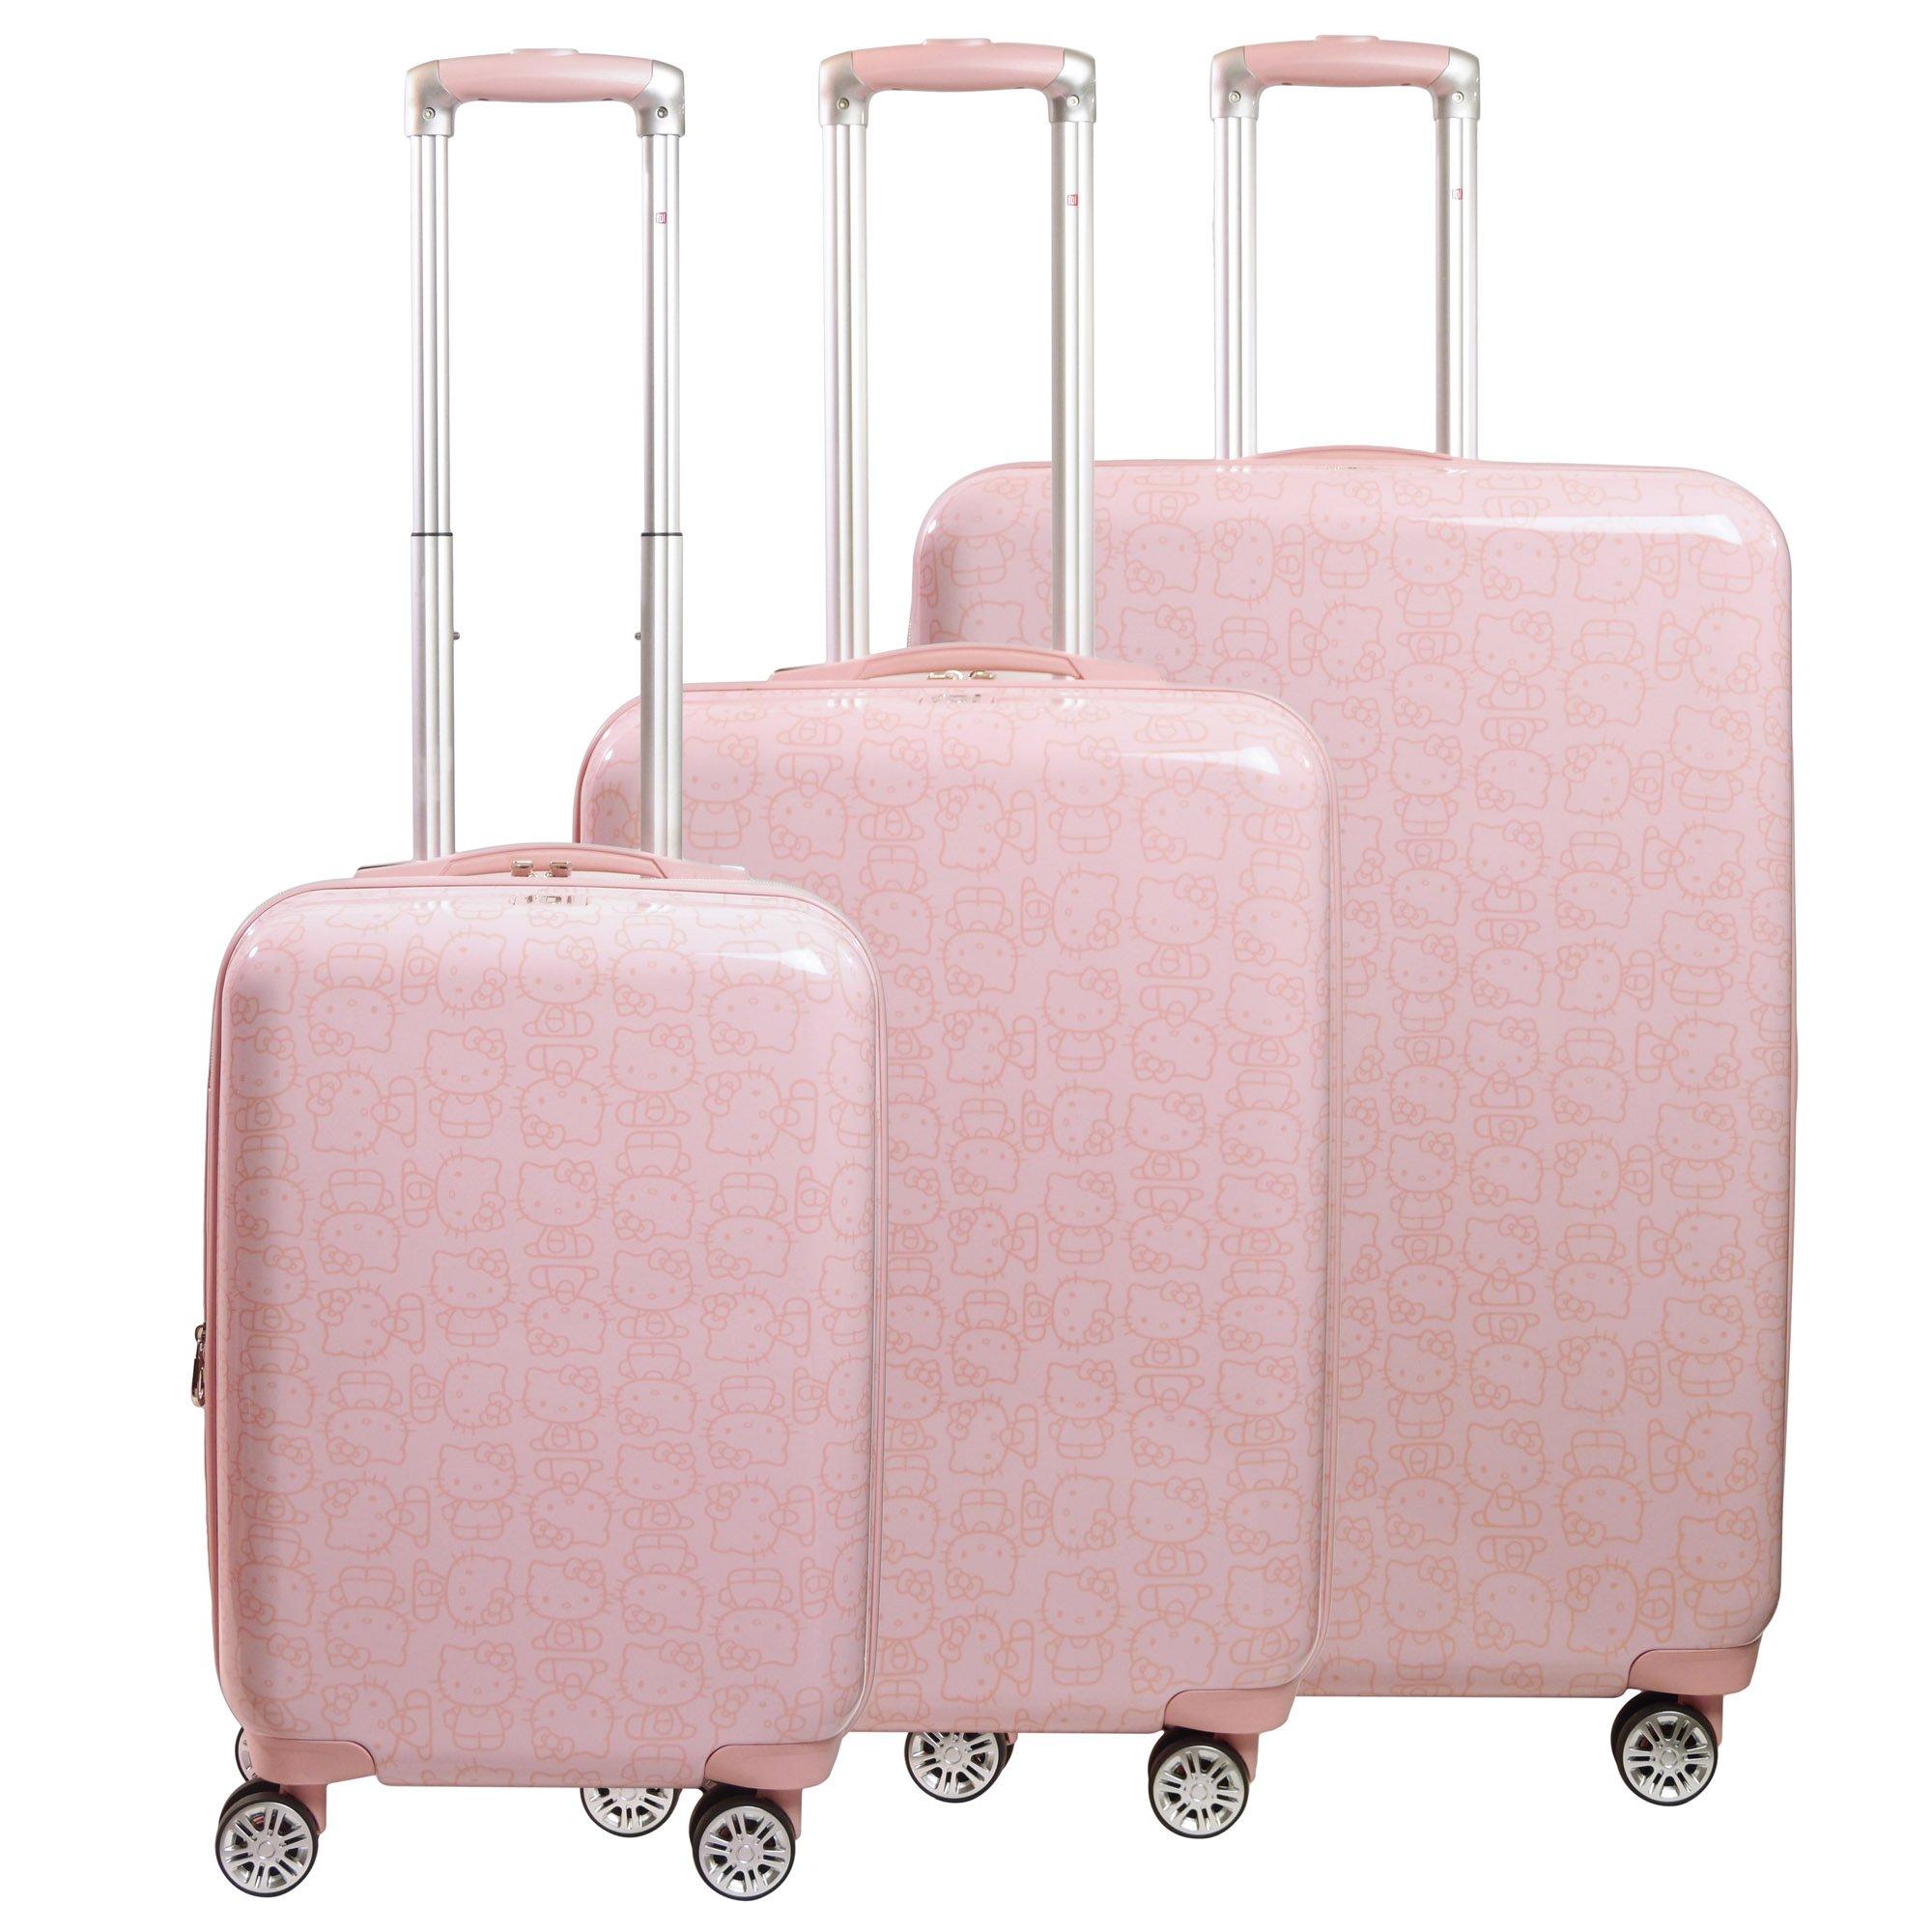 Hello Kitty Pose Print Hard-Sided Carry-On Luggage 3-Piece Set - Pink, Concept One